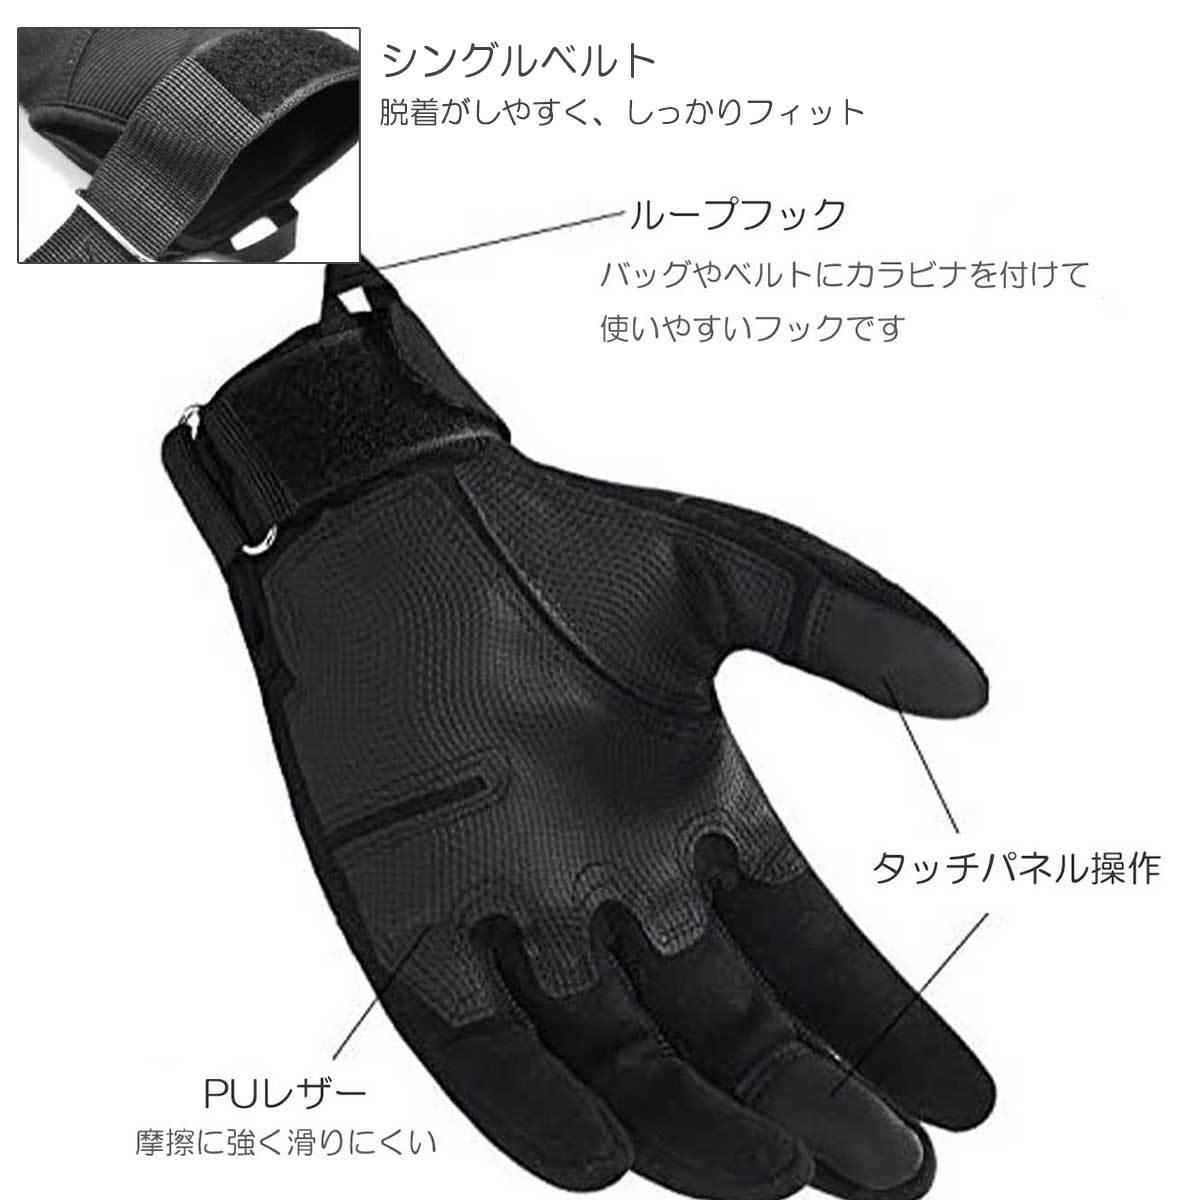  glove gloves strongest guard protector Survival outdoor Survival game 